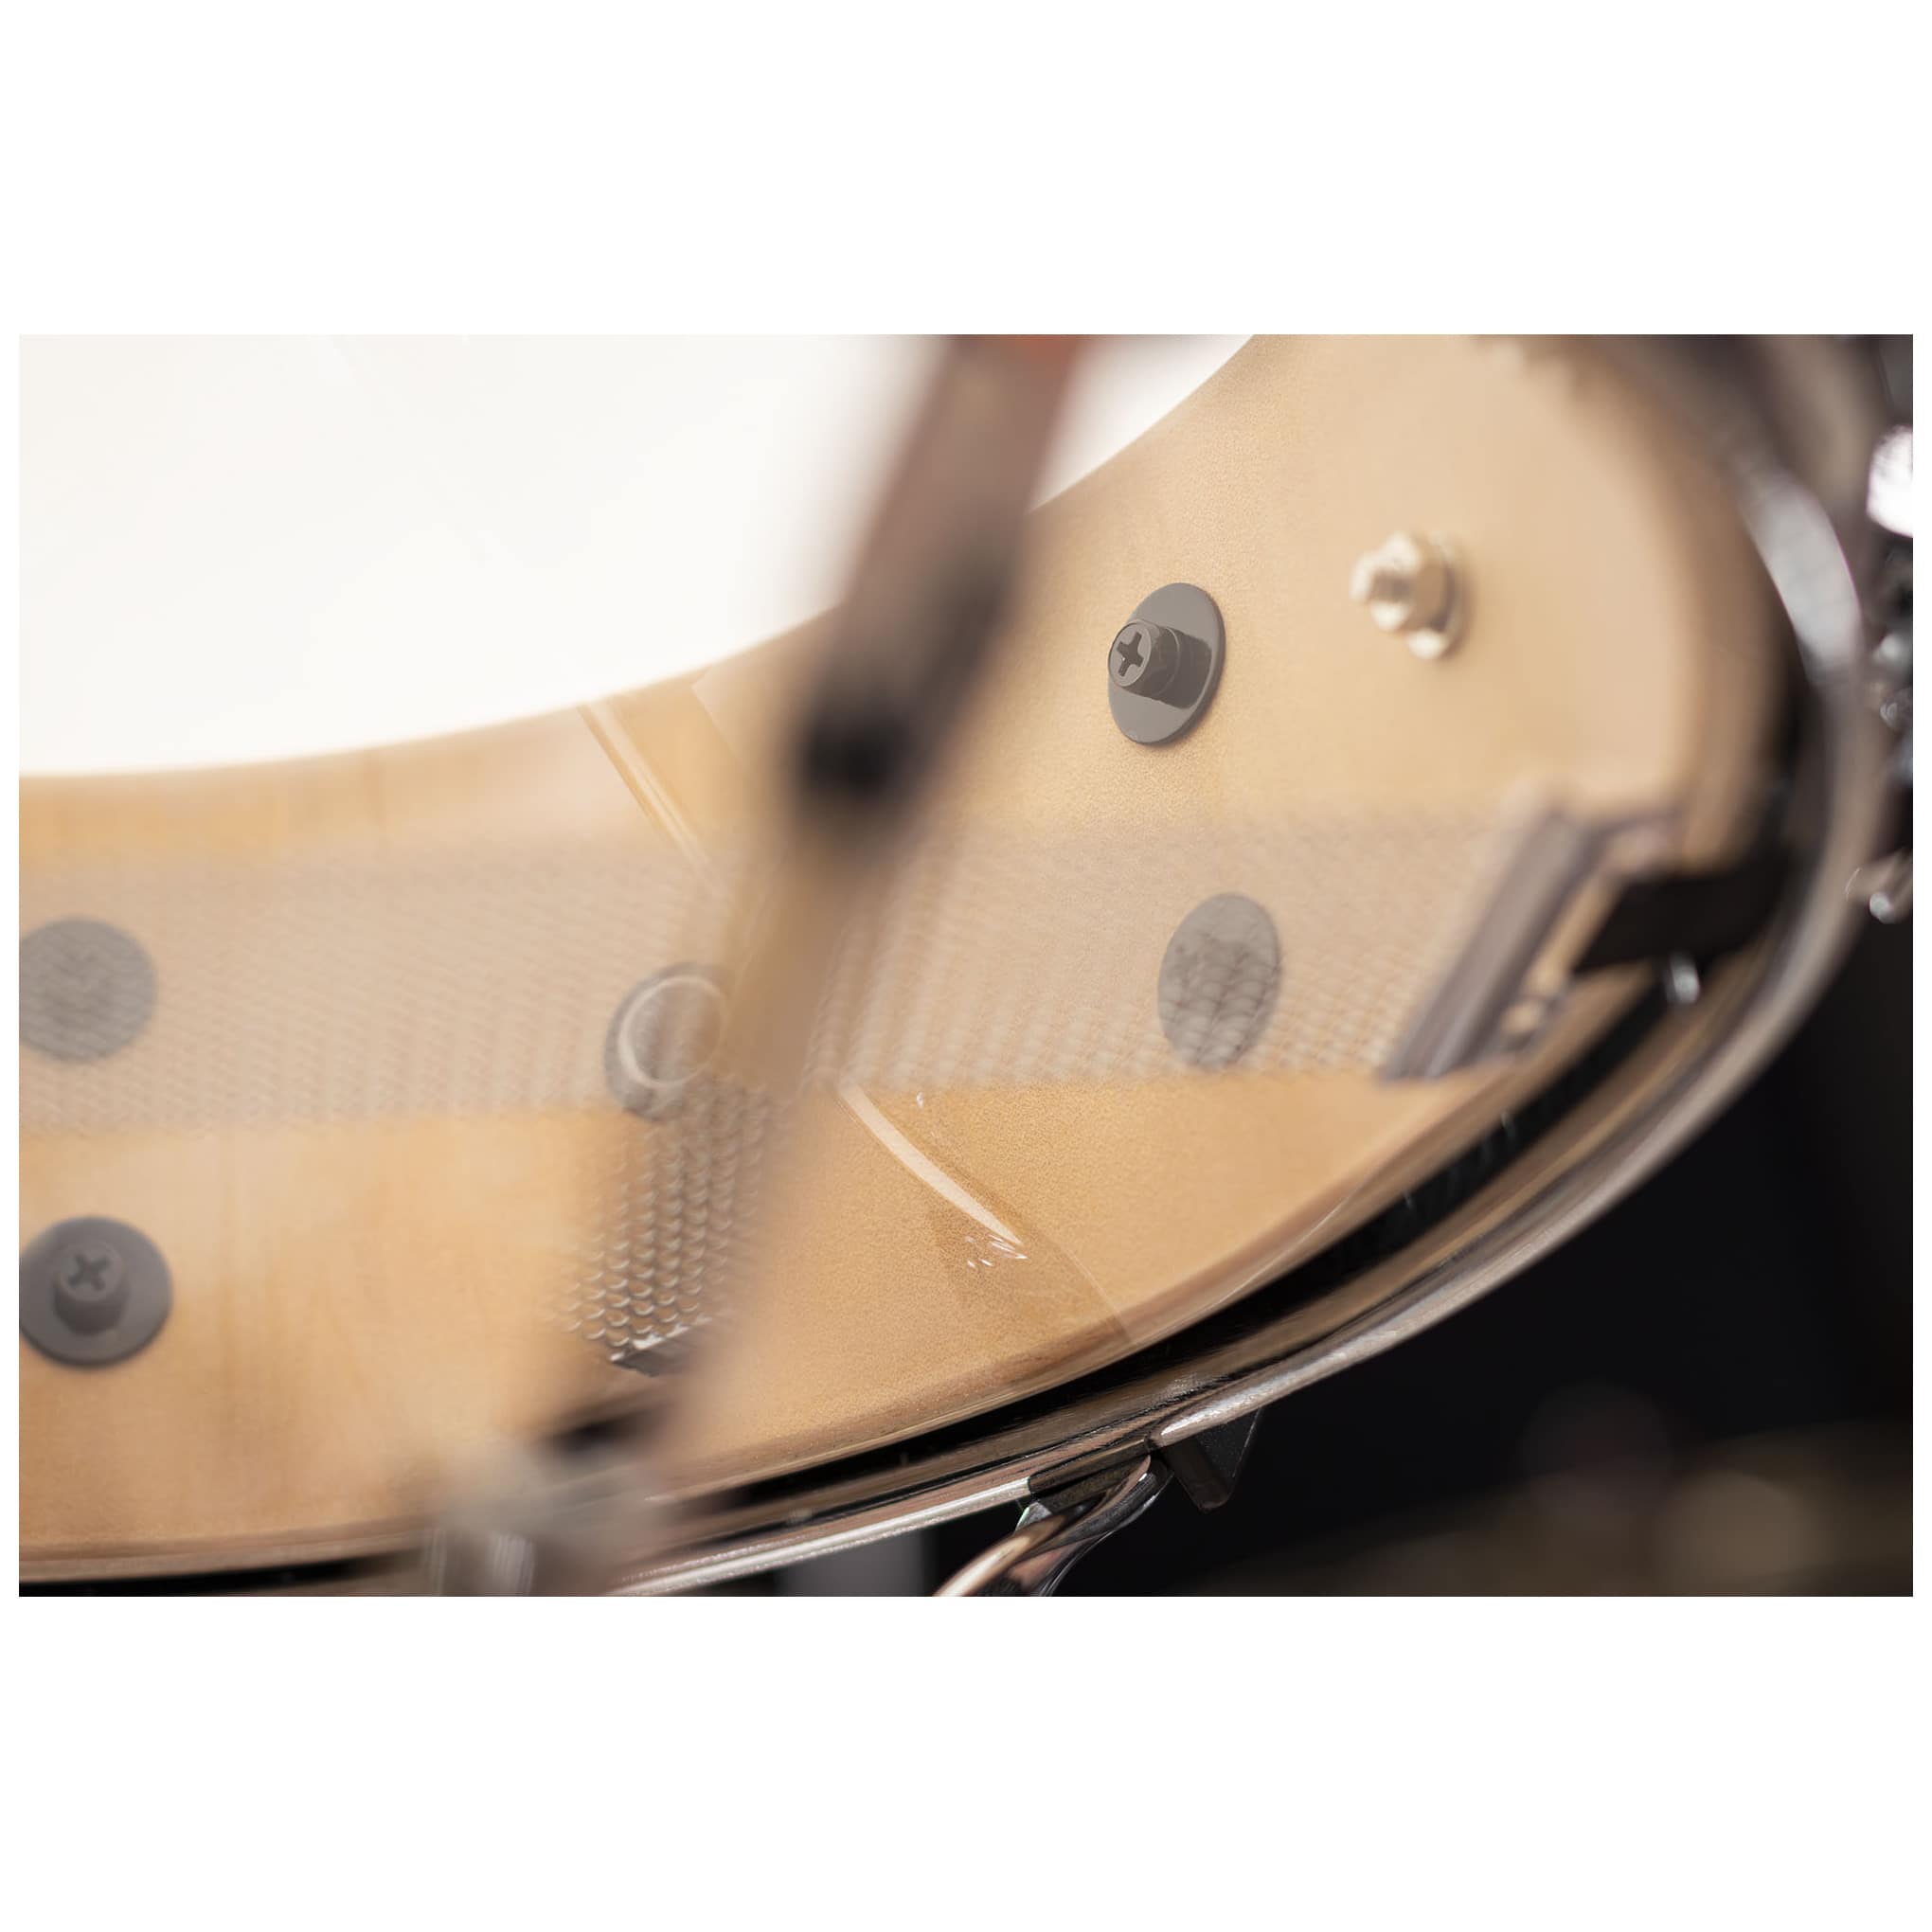 Meinl Percussion MPCSS - Compact Side Snare Drum 10" 4